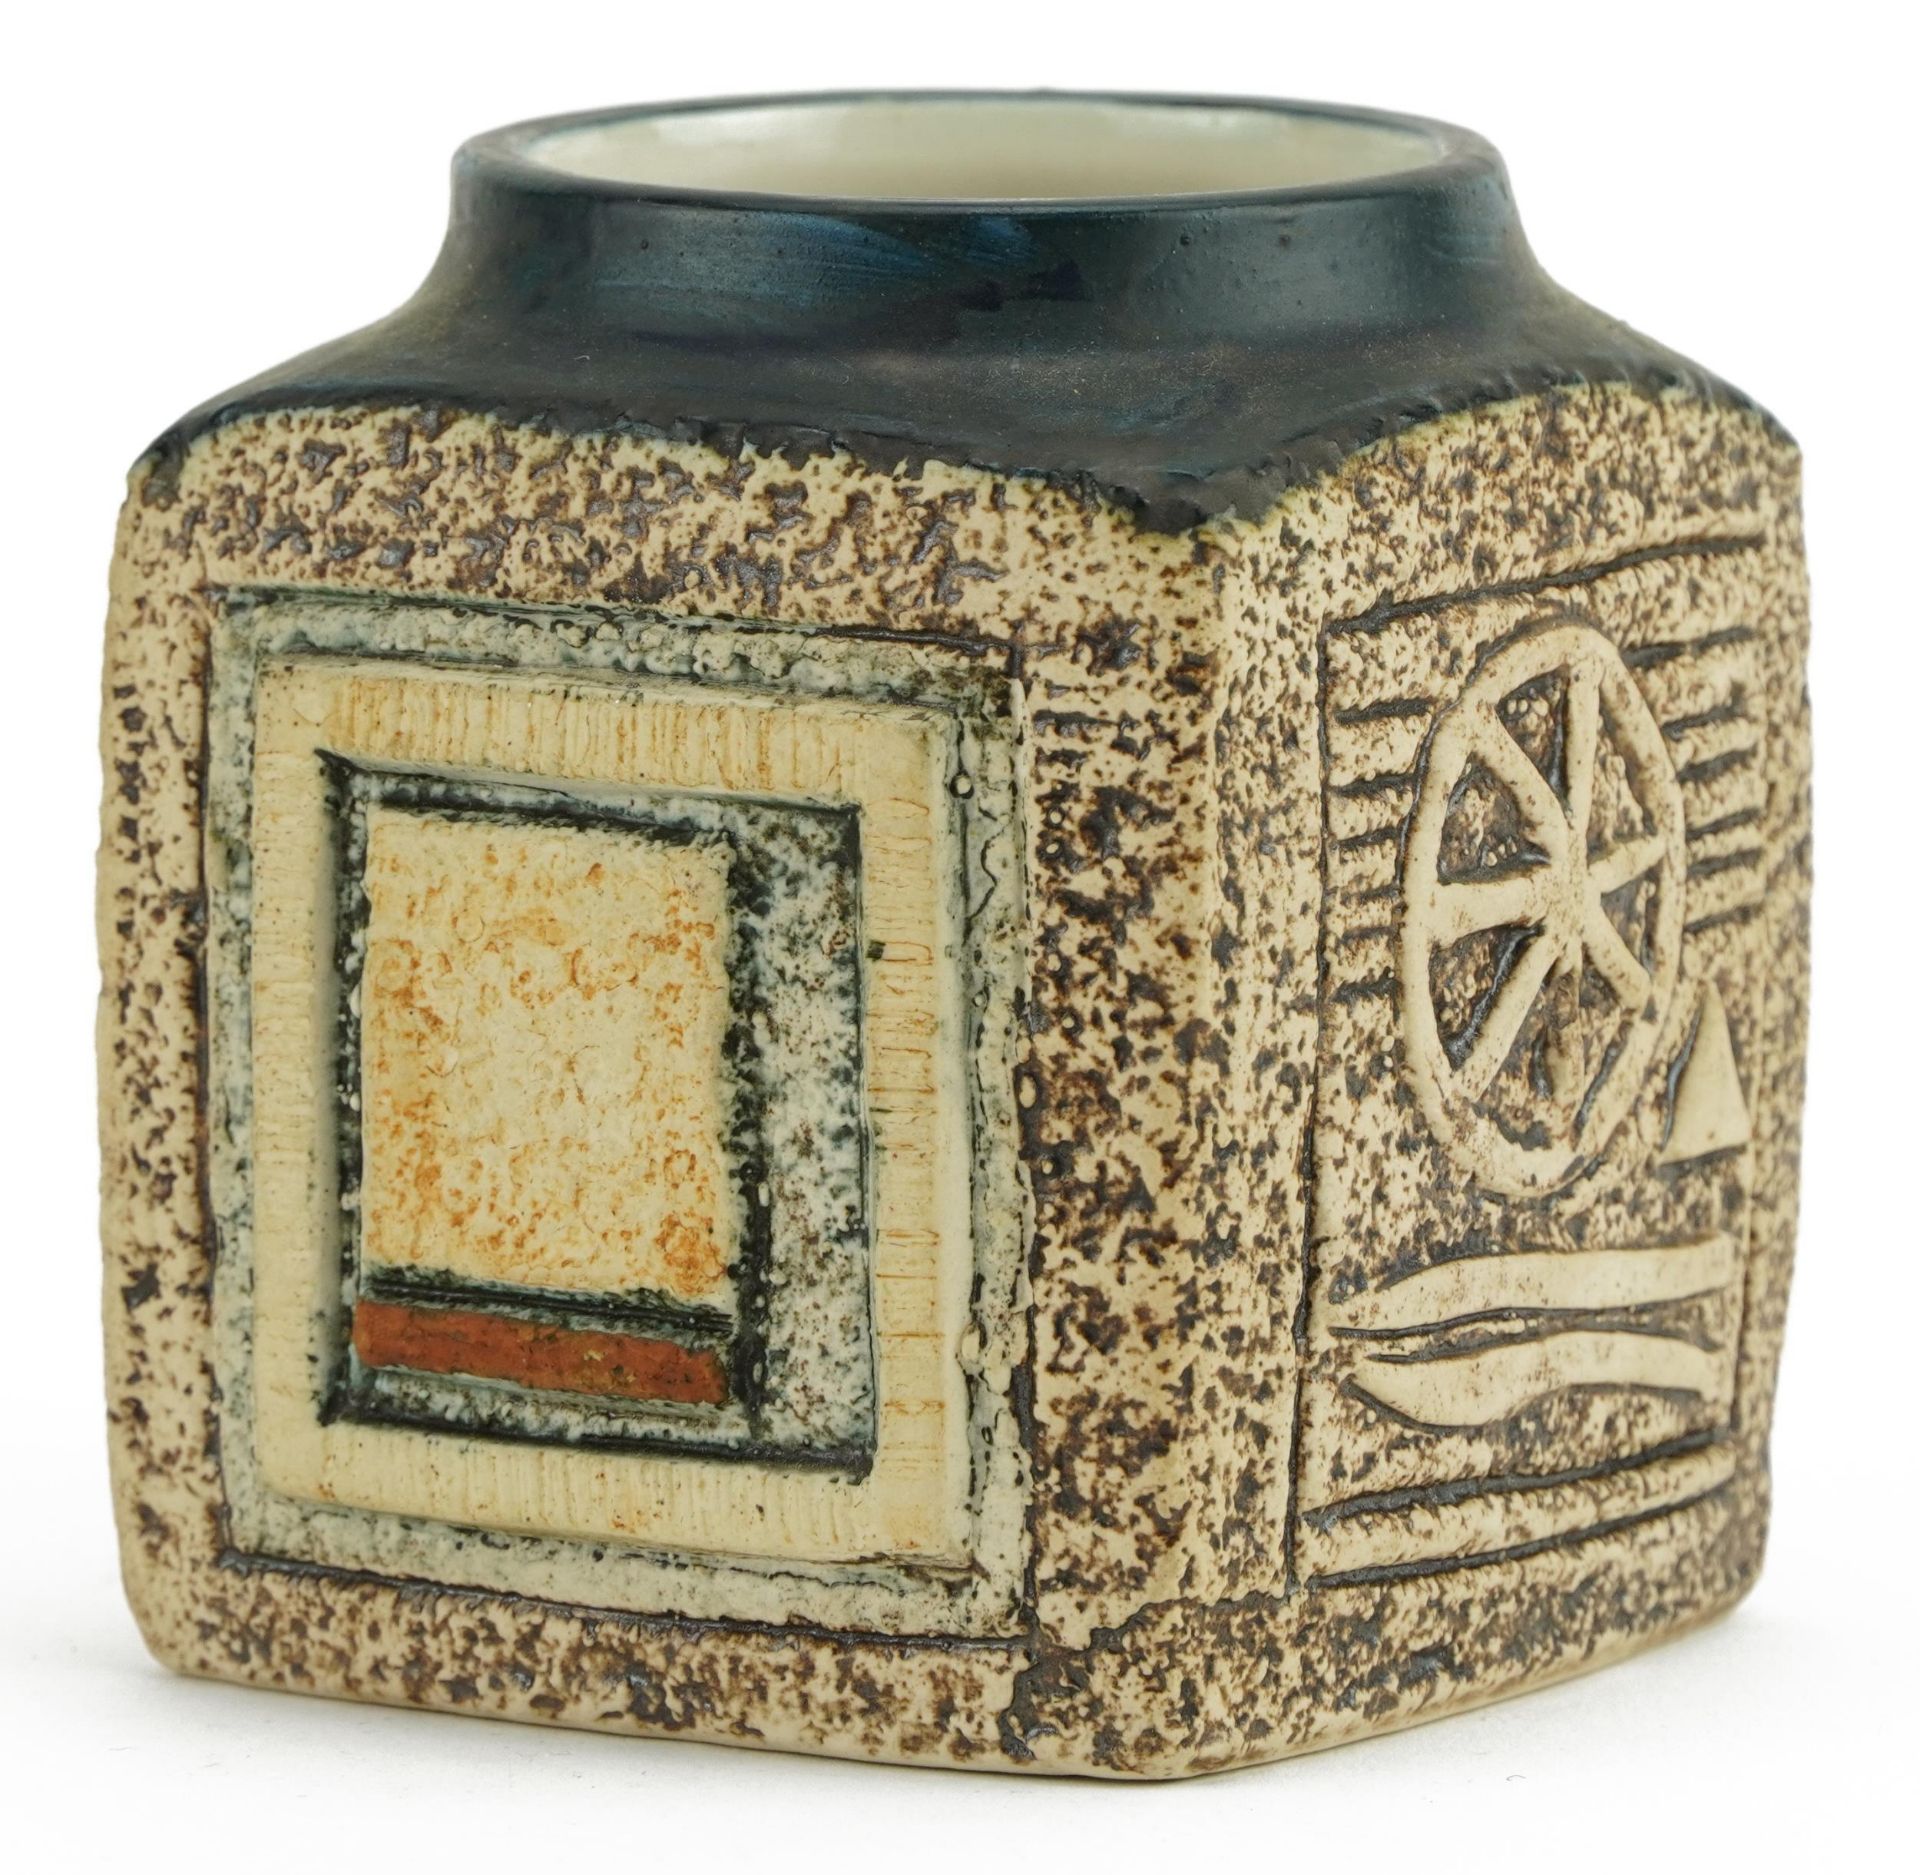 Jane Fitzgerald for Troika, St Ives pottery marmalade pot hand painted and incised with an